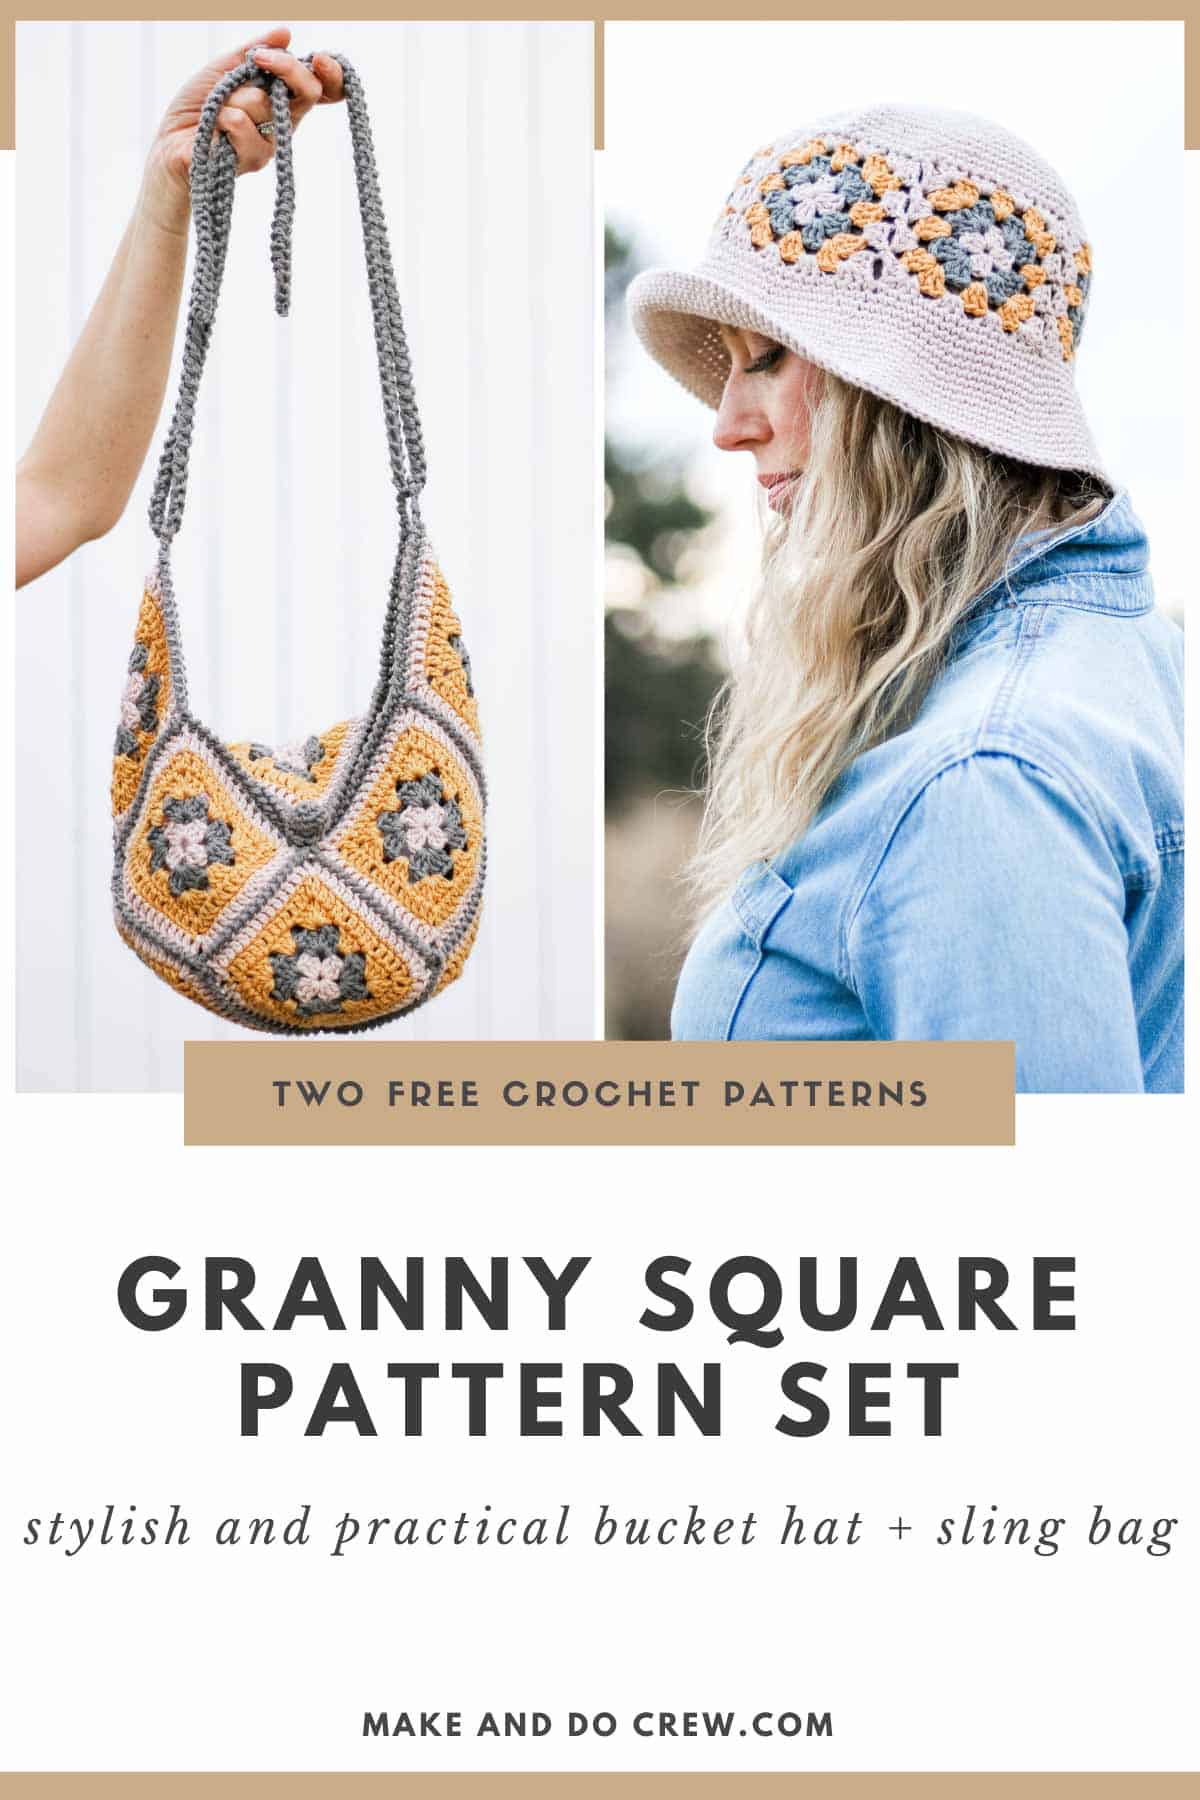 This image shows a free crochet pattern for a granny square crochet hat and bag matching set. One image shows a woman's hand holding the bag in the air, and the second image shows a woman with blonde hair looking to the left wearing the crochet granny square hat.